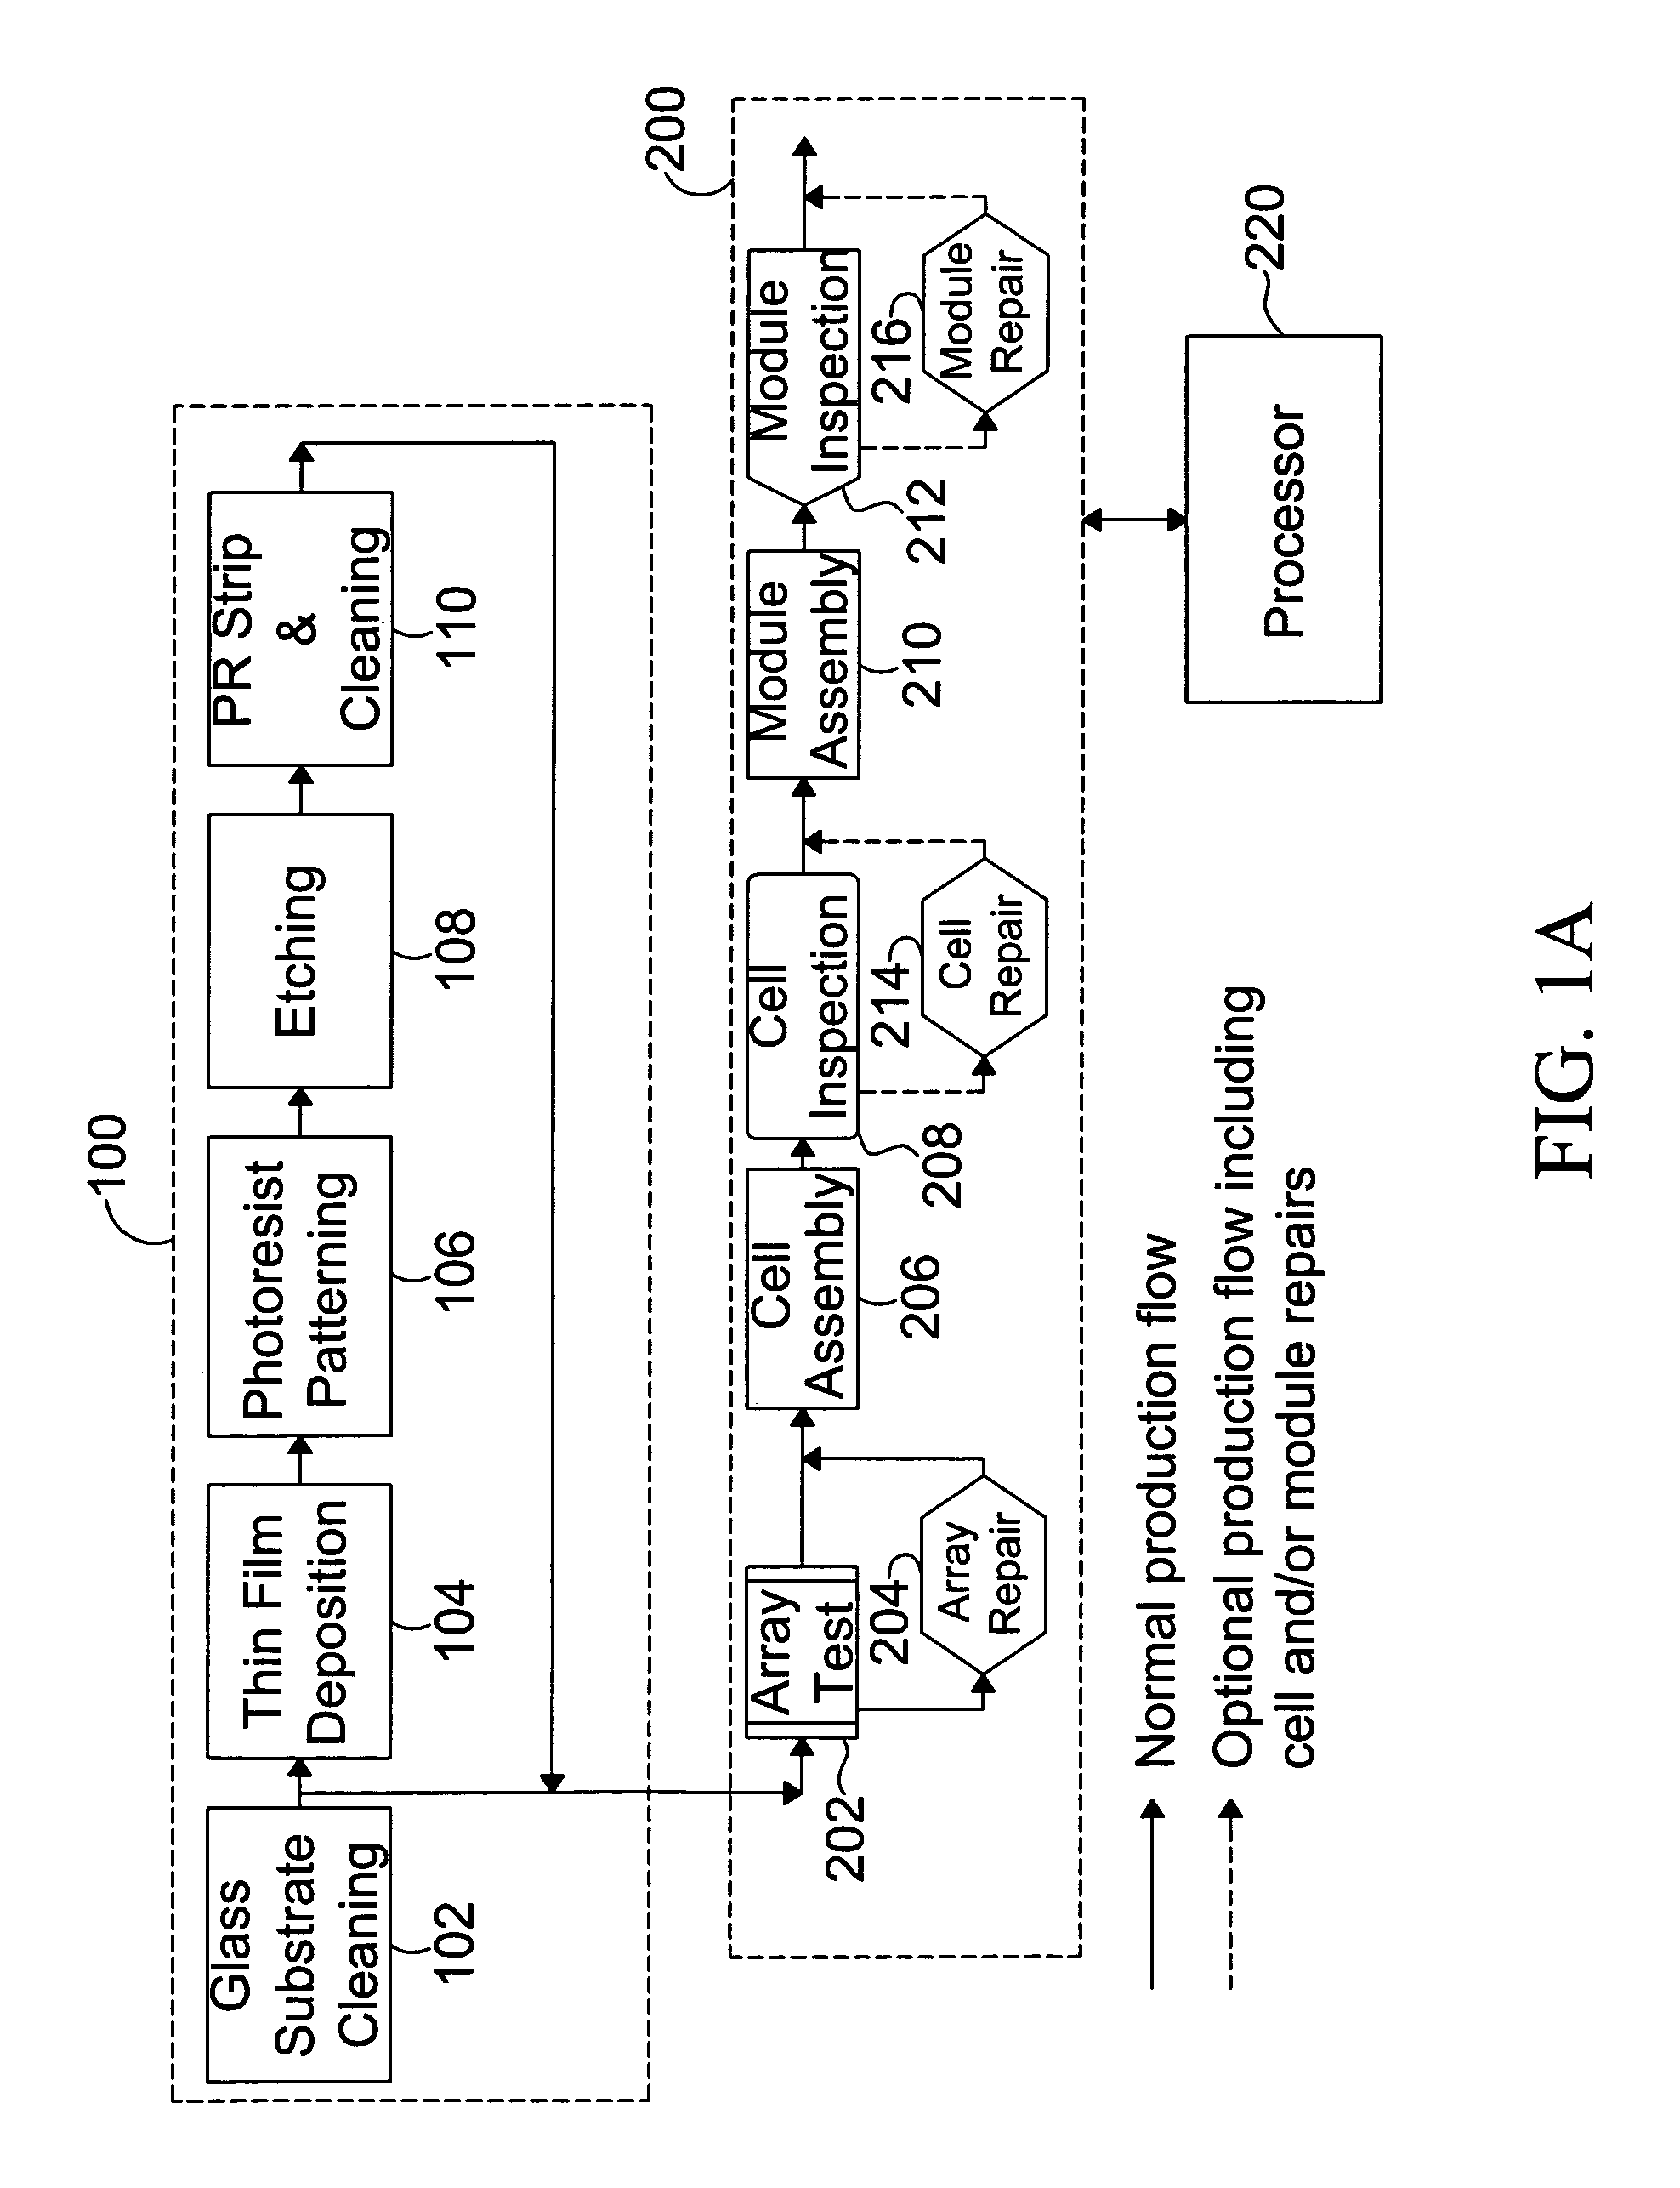 System and method for improving TFT-array manufacturing yields